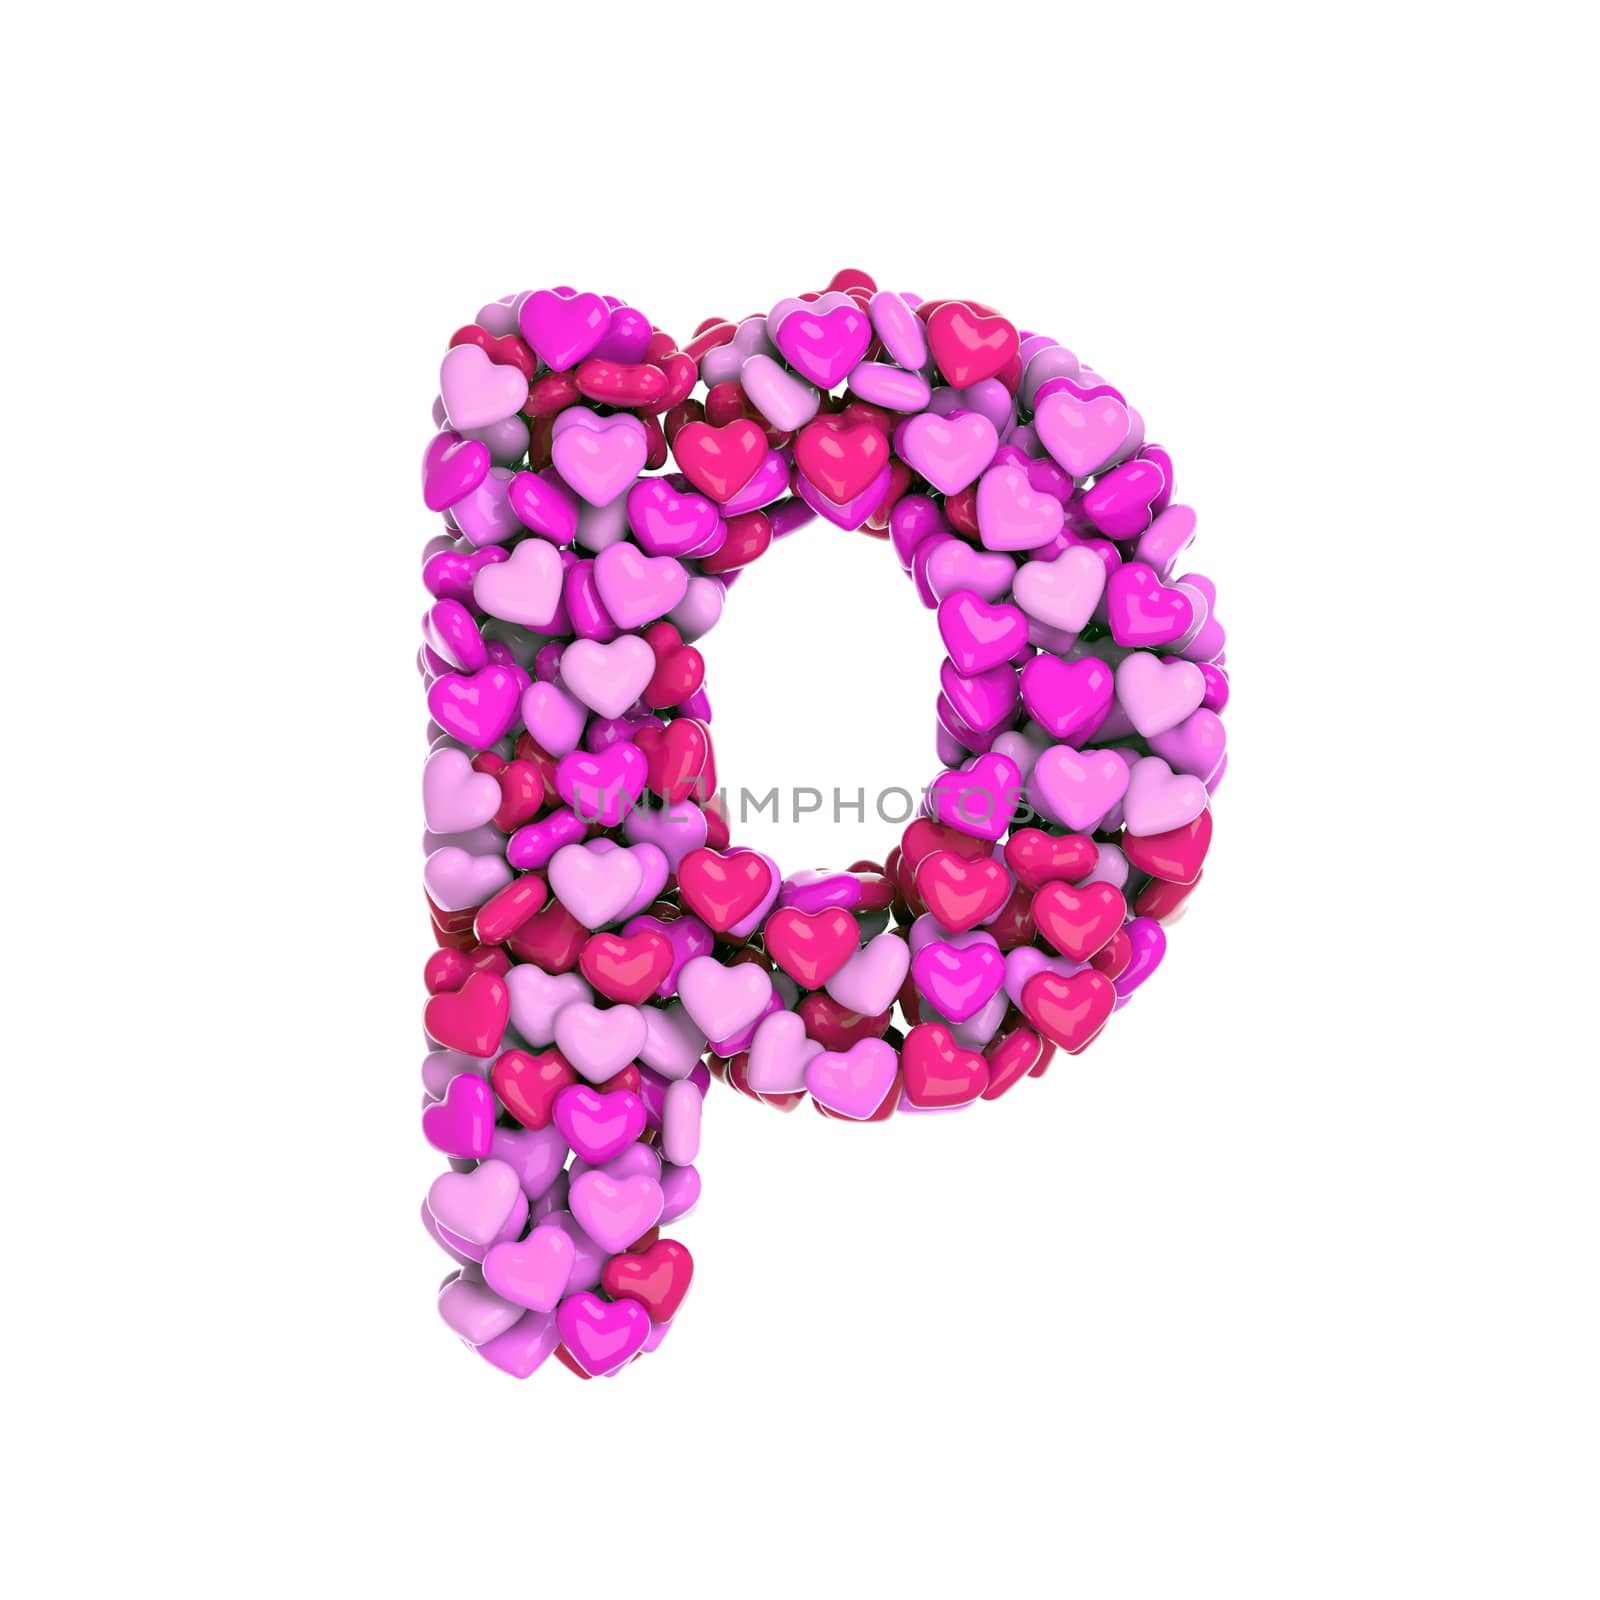 Valentine letter P - Lowercase 3d pink hearts font - Love, passion or wedding concept by chrisroll